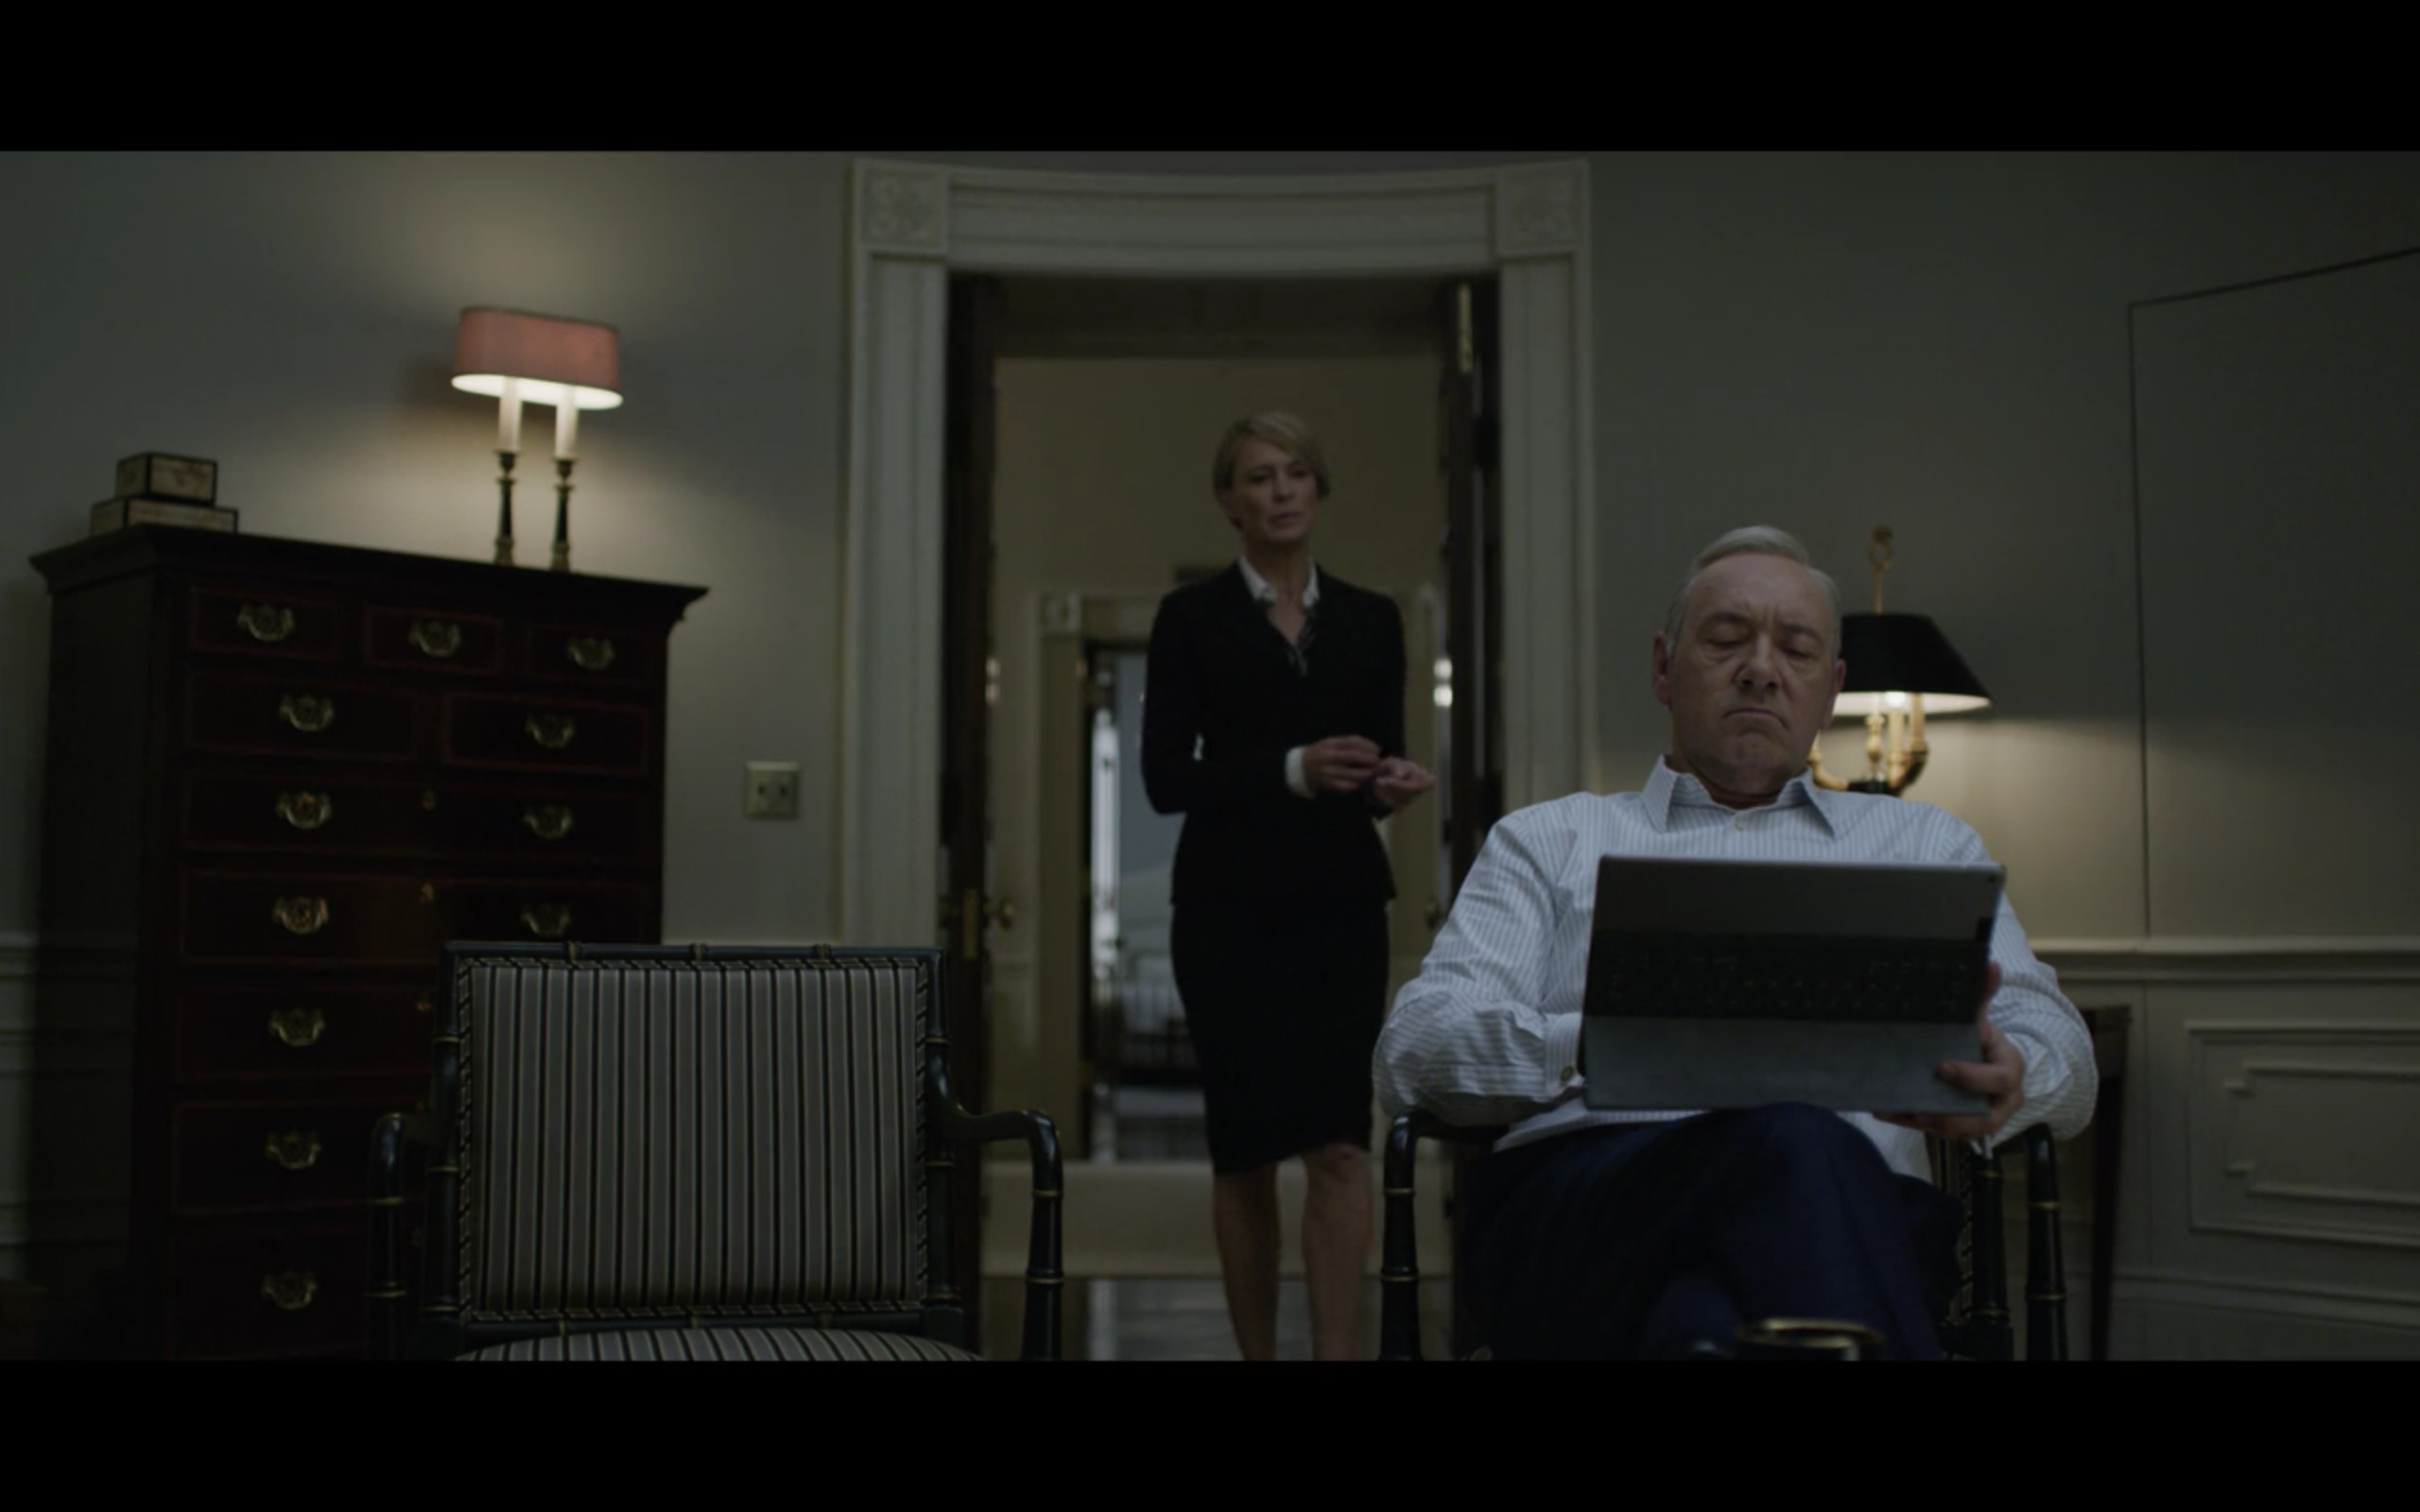 2560x1600 'House of Cards' Face App Could Subliminally Influence Voters | Inverse